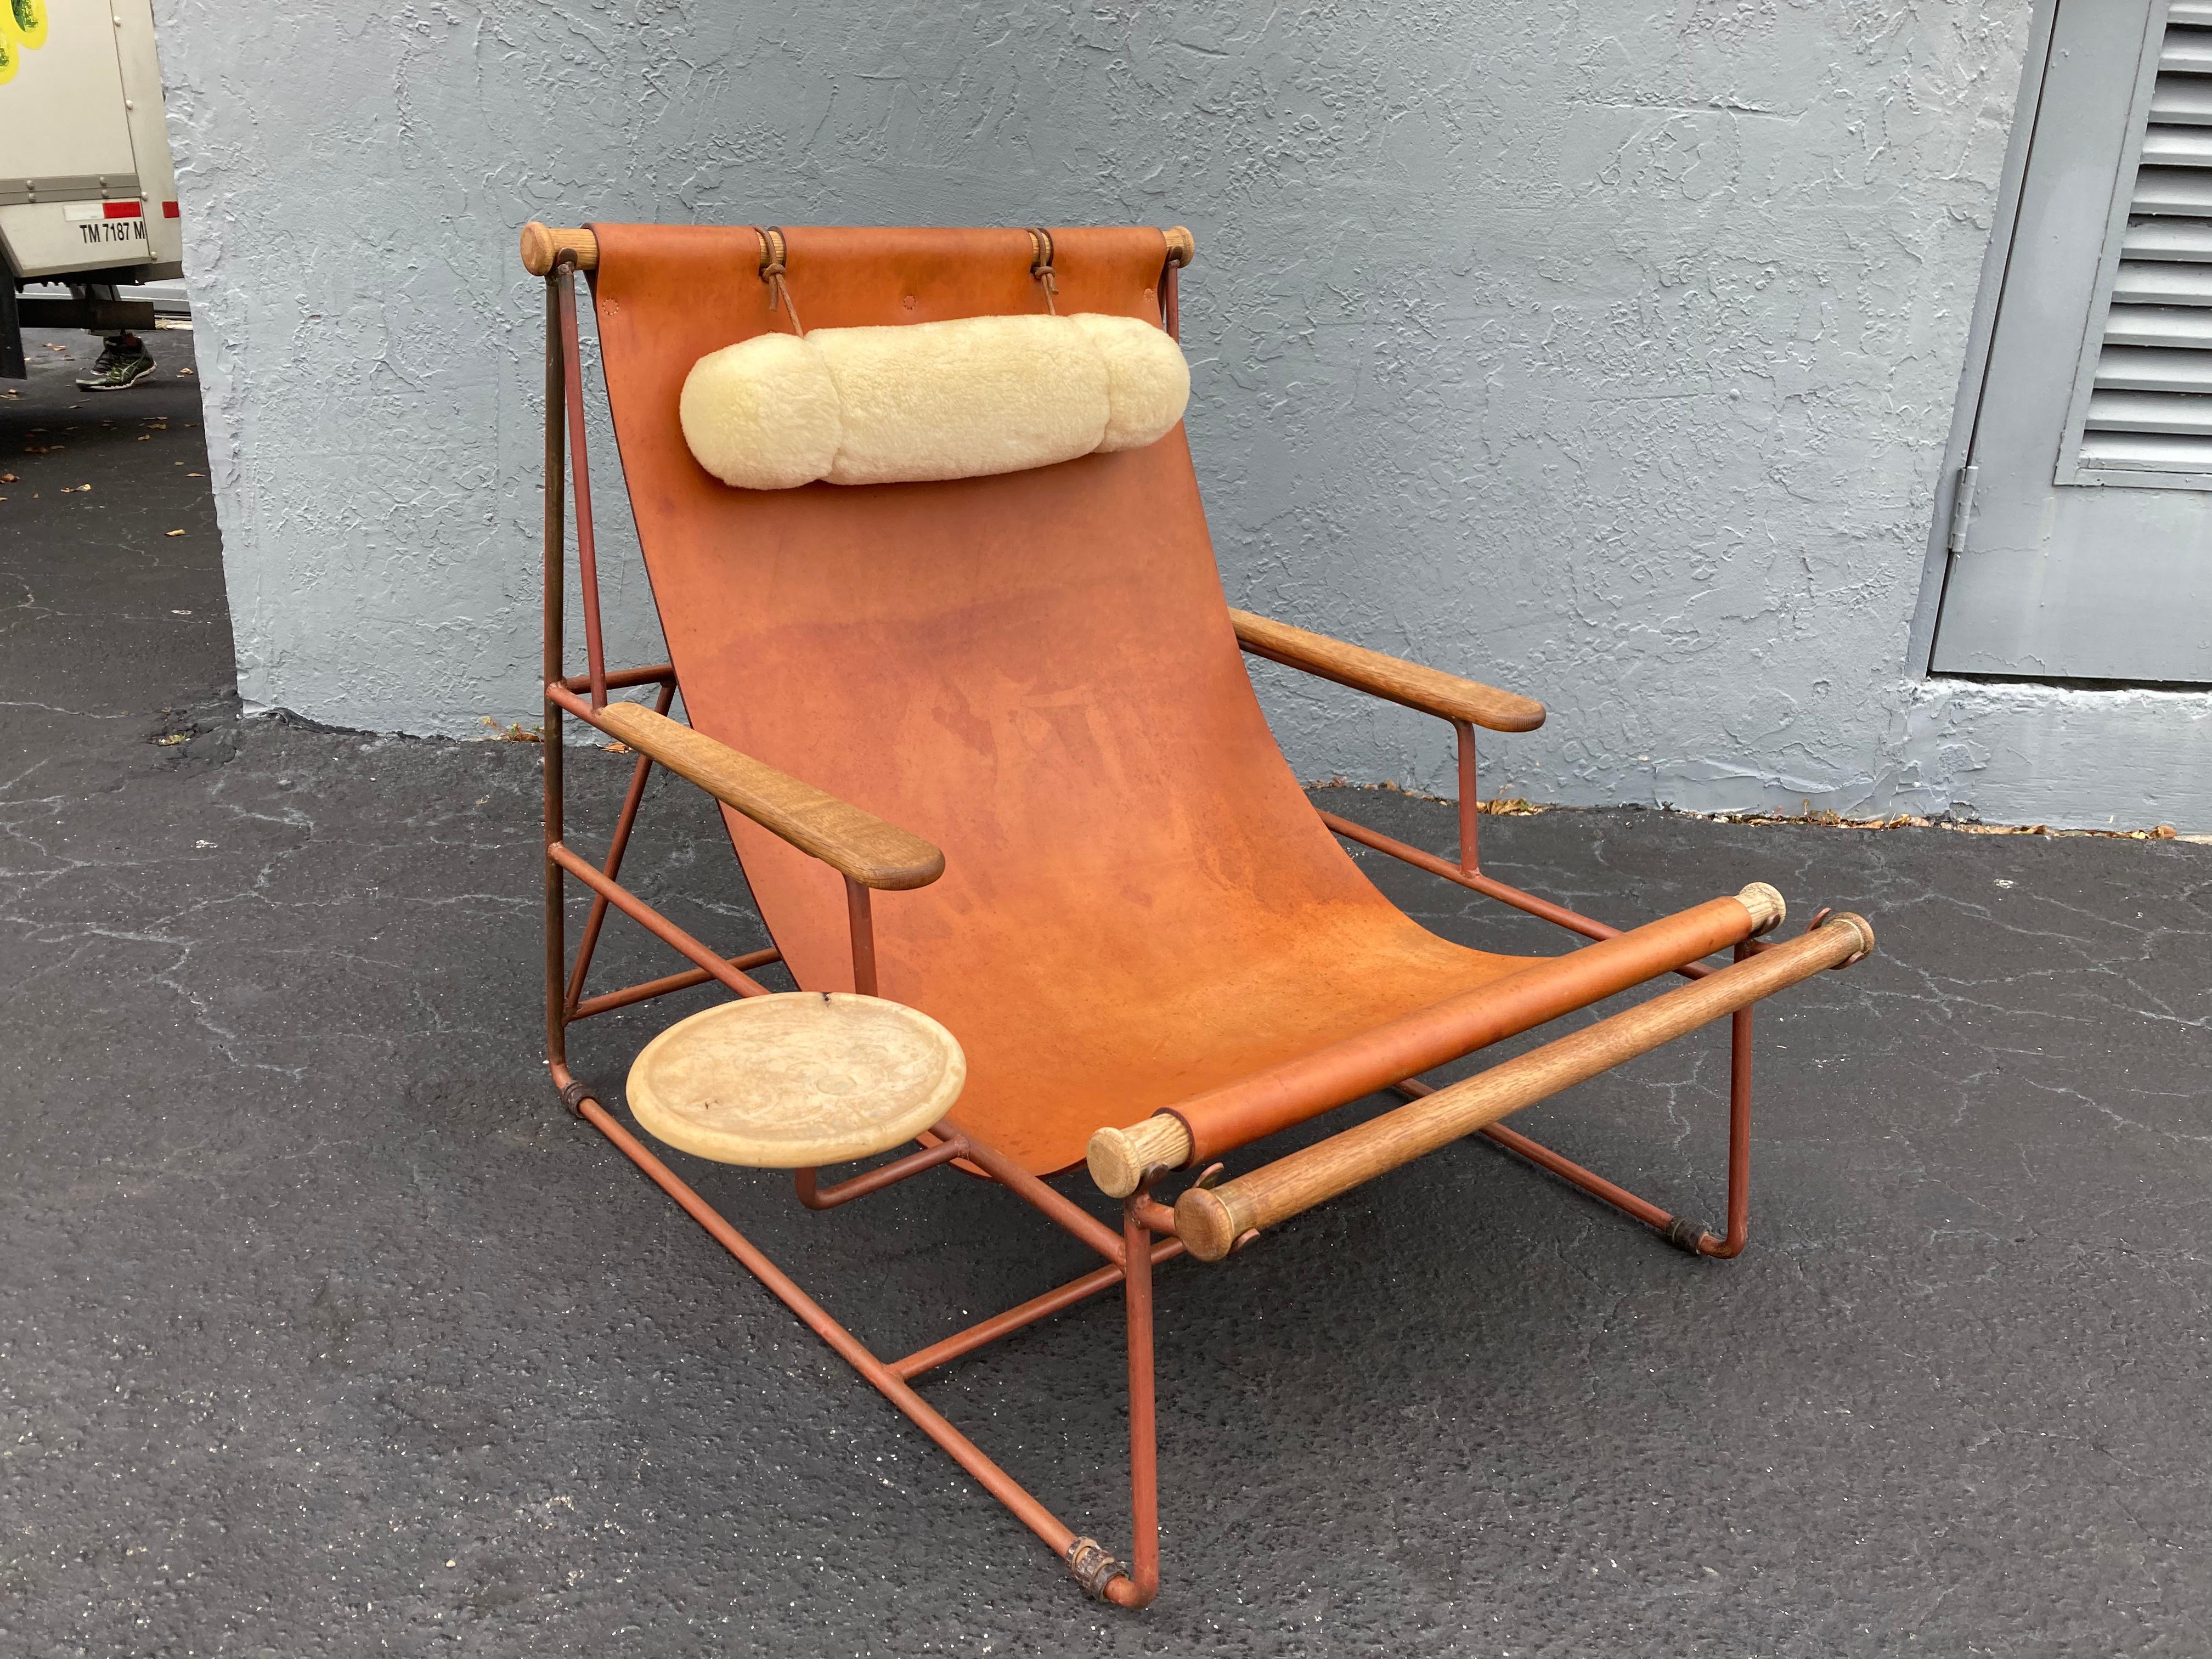 Deck lounge chair designed by Tyler Hays and made by BDDW.
The chair has a beautiful patina, bronze frame has turned reddish and leather has collected wear, comes with a shearling pillow and wood tray.